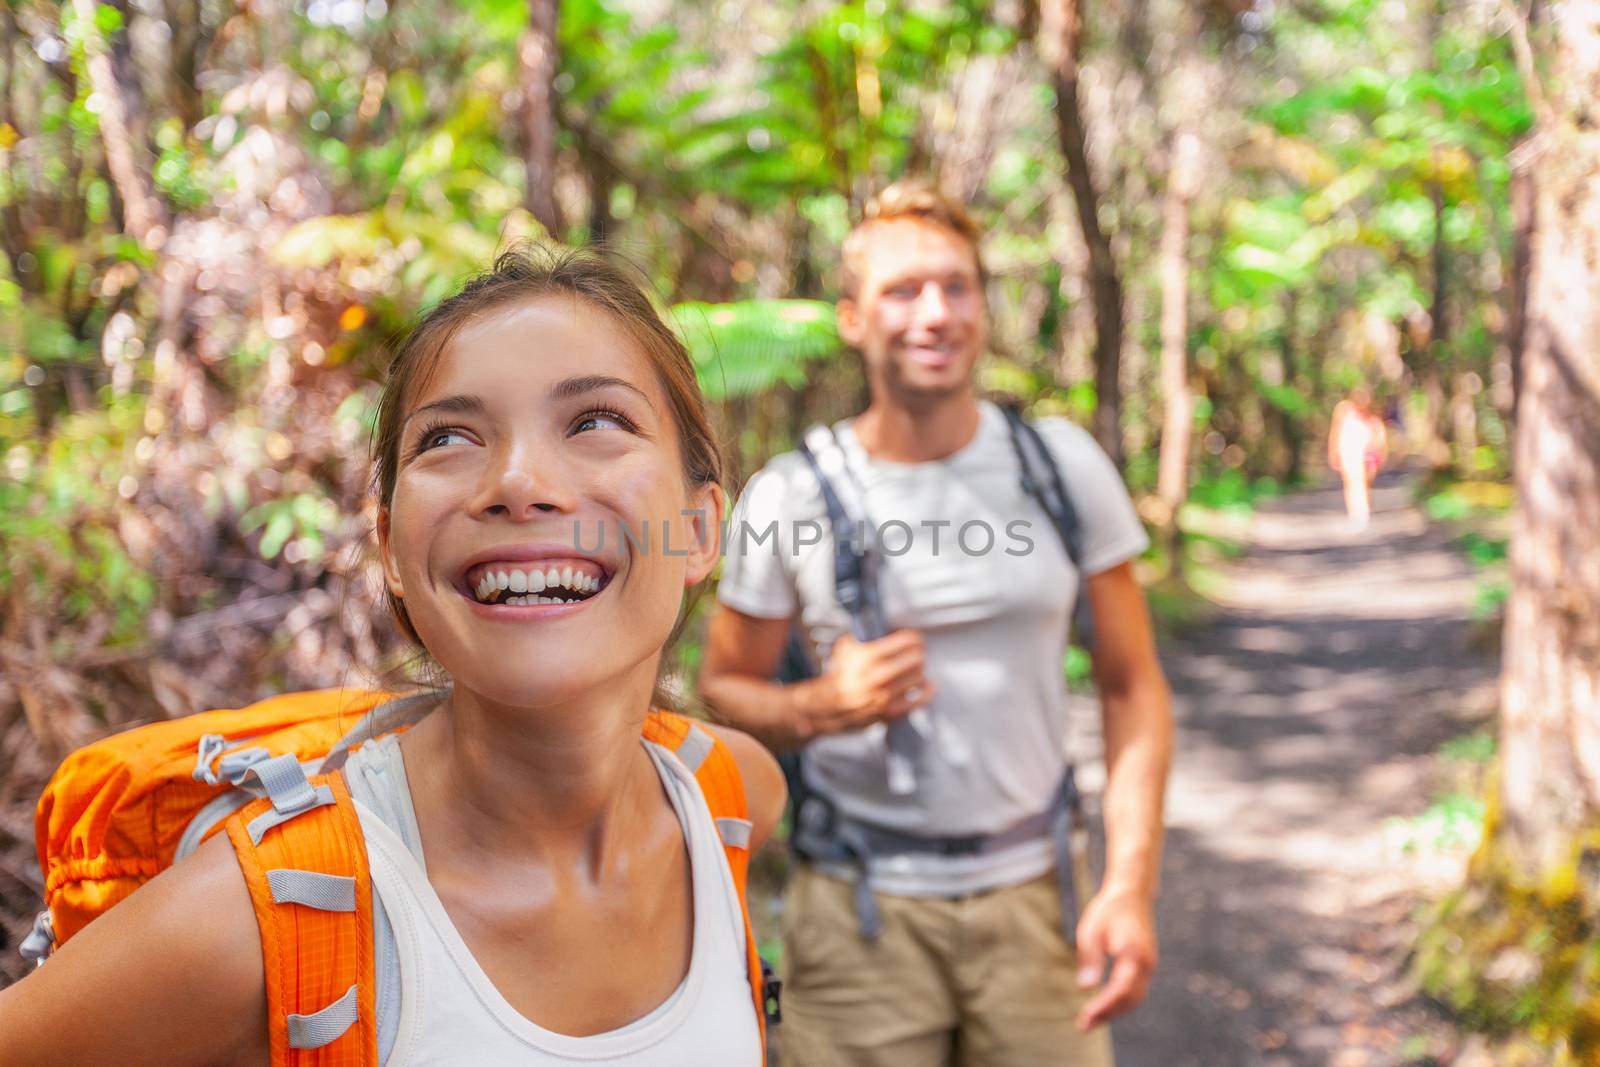 Hiking couple on travel hike outdoor trekking - young active people lifestyle camping with bags in forest. Smiling happy Asian woman enjoying walk in woods with friend.